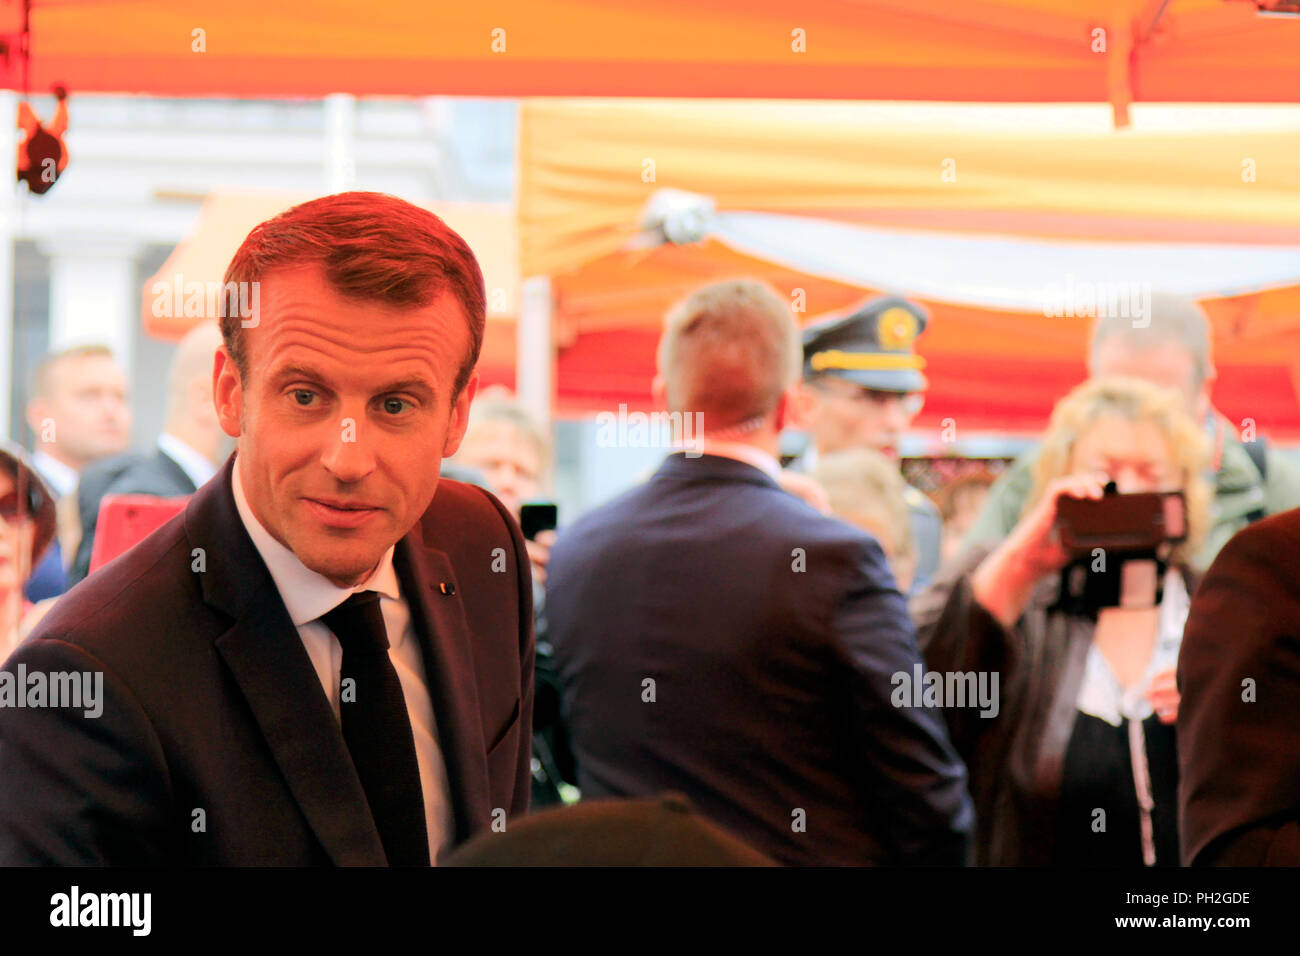 Helsinki, Finland. August 30, 2018. French President Emmanuel Macron (L) leaves cafeteria at Market Square after having a cup of coffee with Finnish President Sauli Niinistö (not in picture). Credit: Taina Sohlman/Alamy Live News Stock Photo